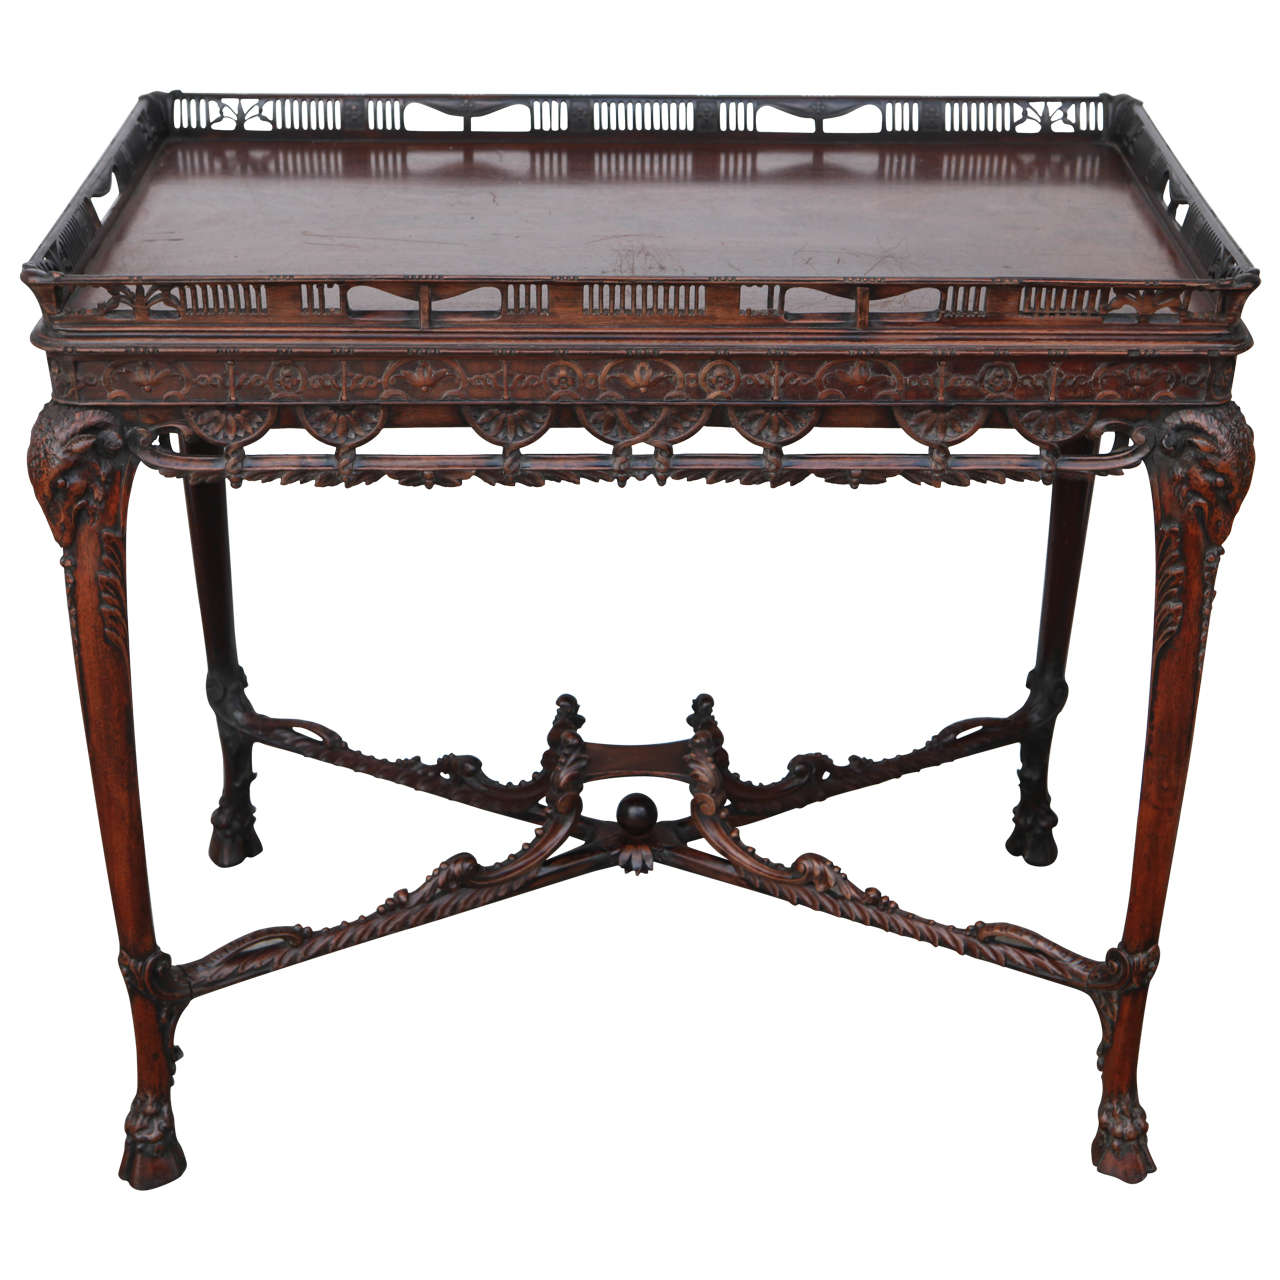 19th Century English Carved Mahogany Table with Stretcher